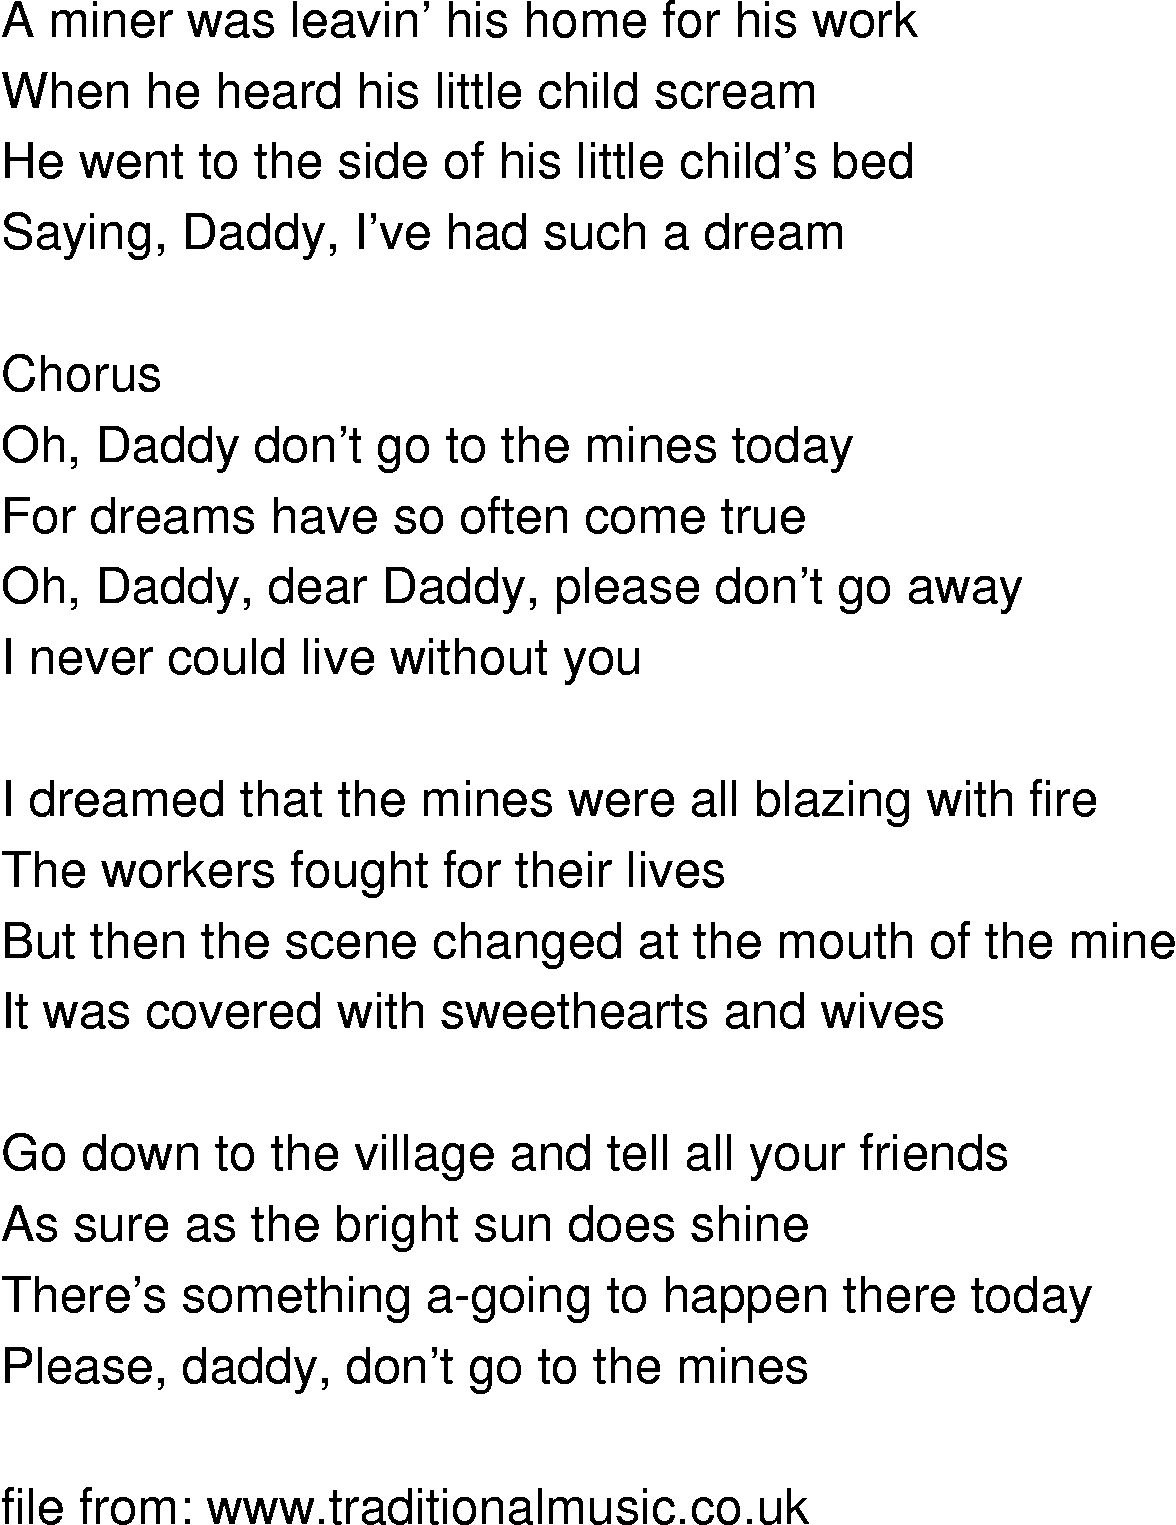 Old-Time (oldtimey) Song Lyrics - dream of a miners child